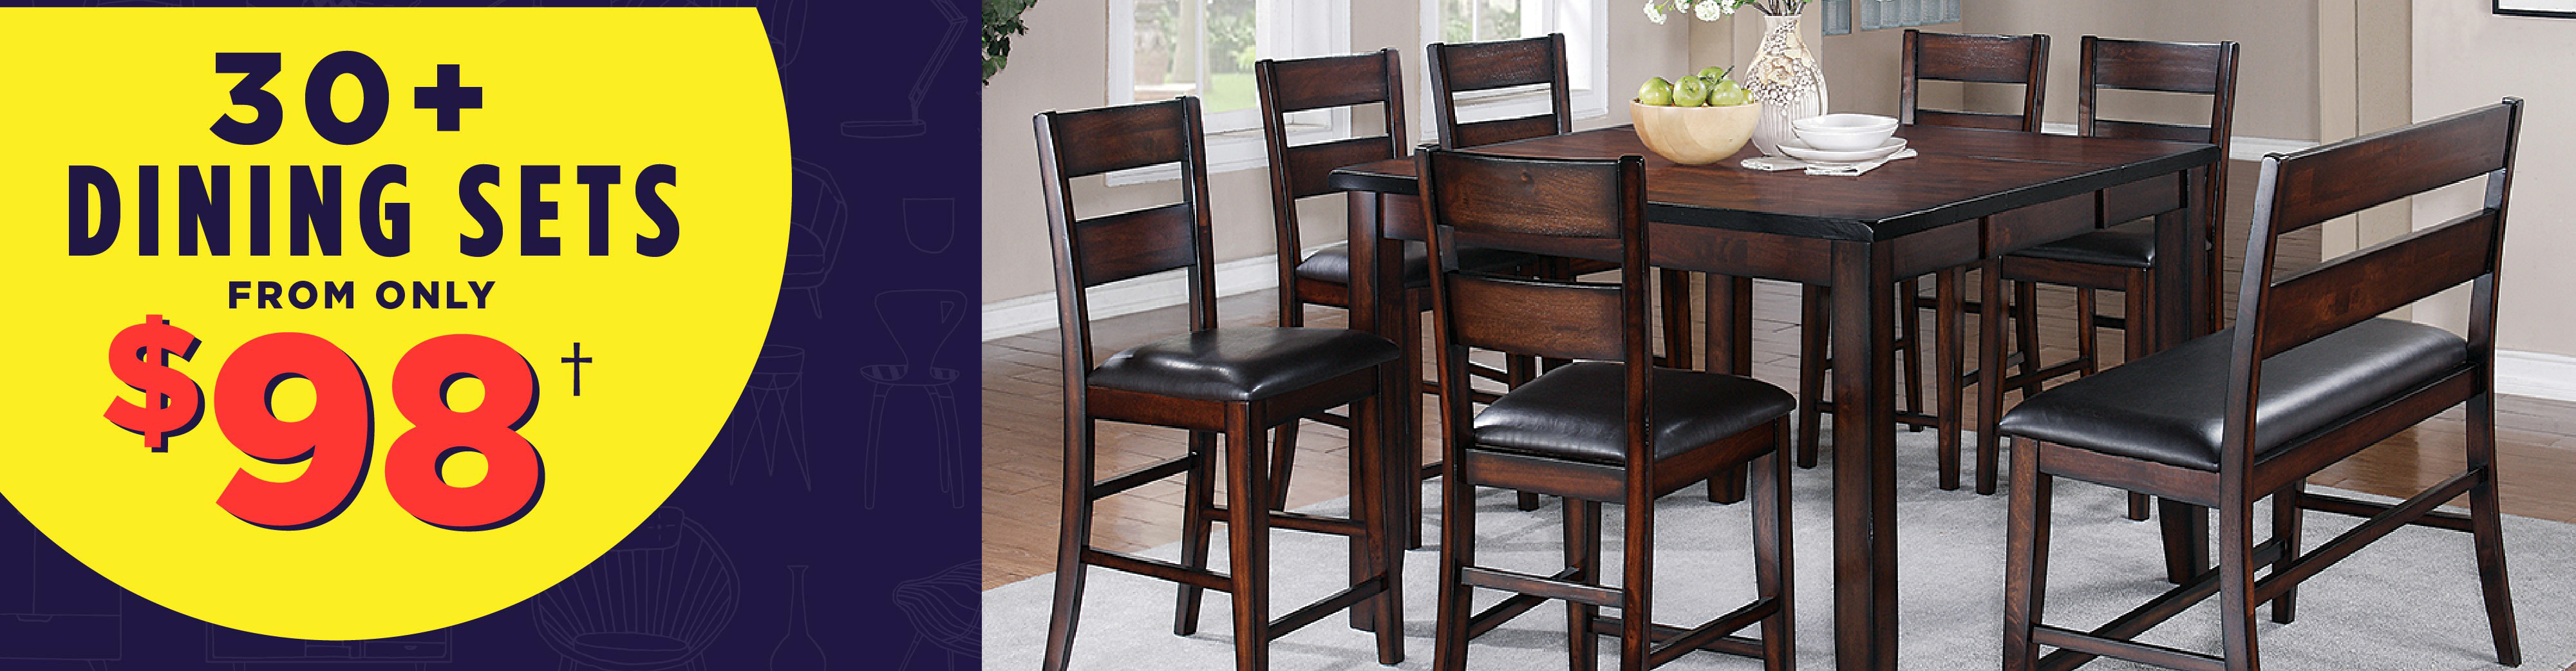 30+ Dining Sets from only $98!